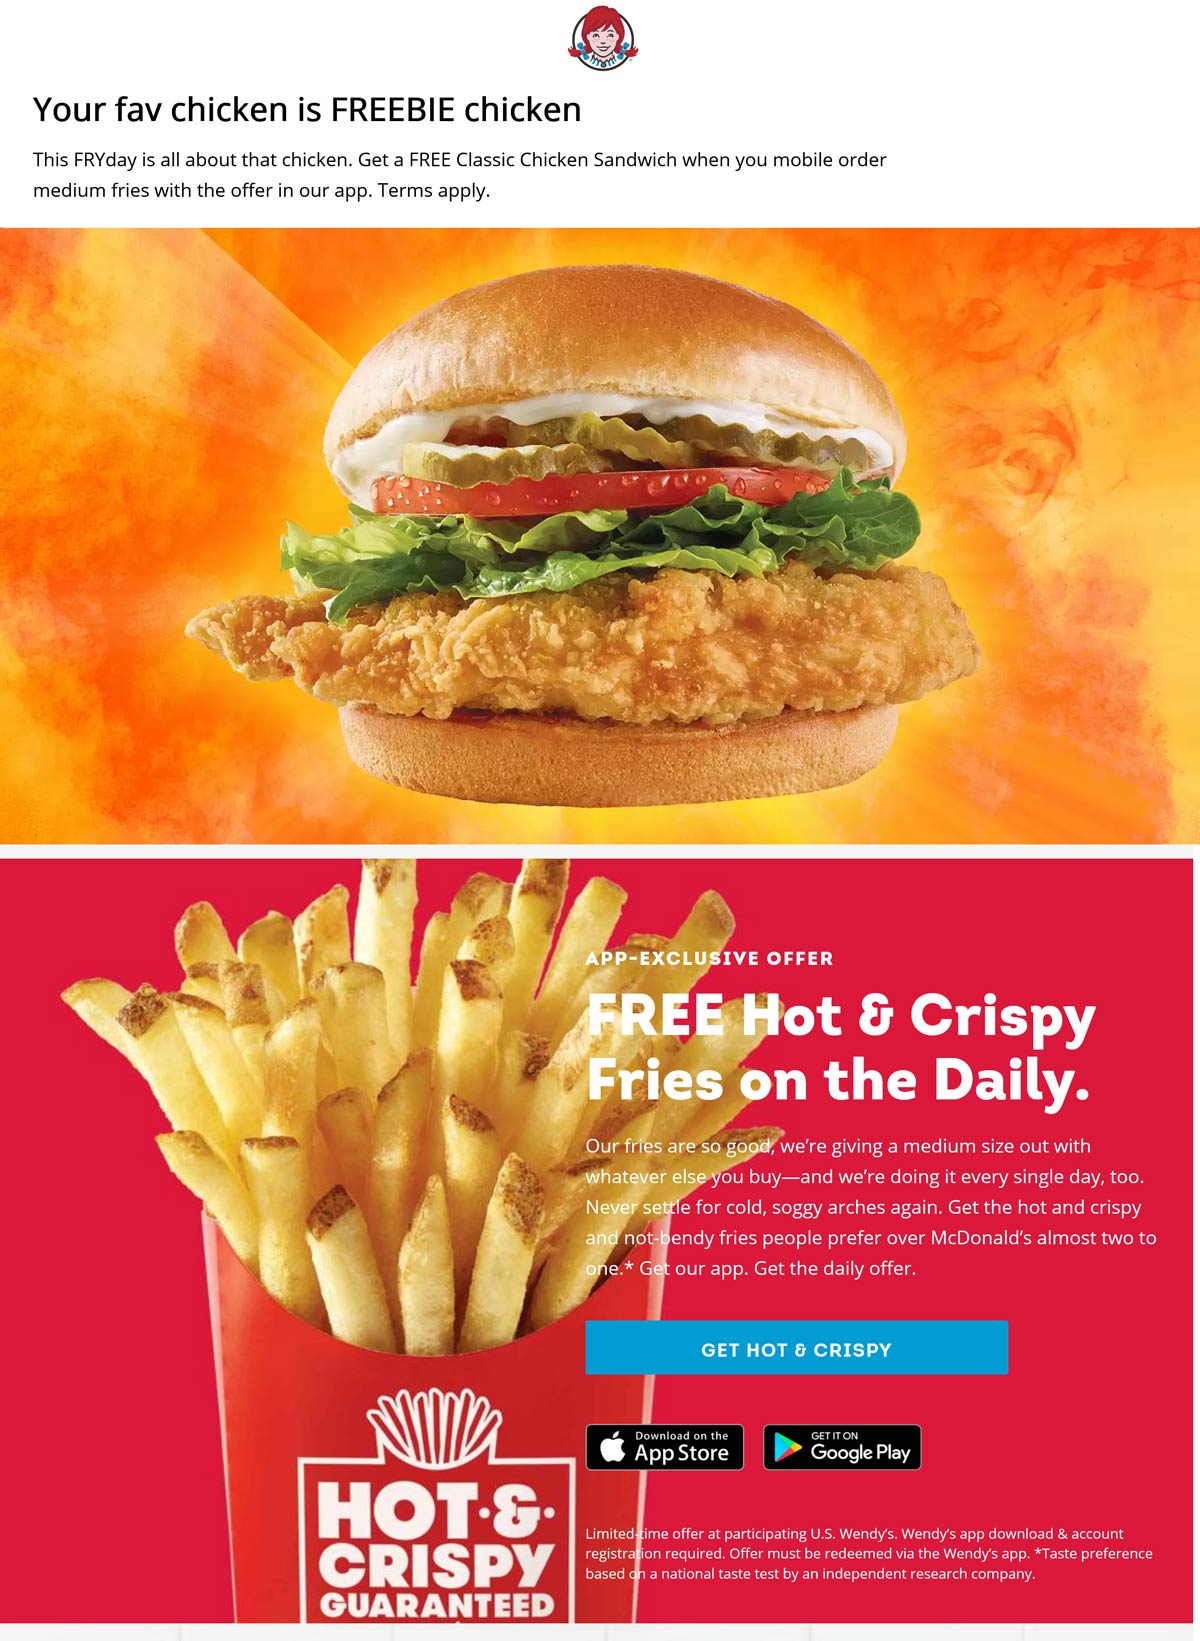 Wendys restaurants Coupon  Free chicken sandwich with your fries today at Wendys #wendys 